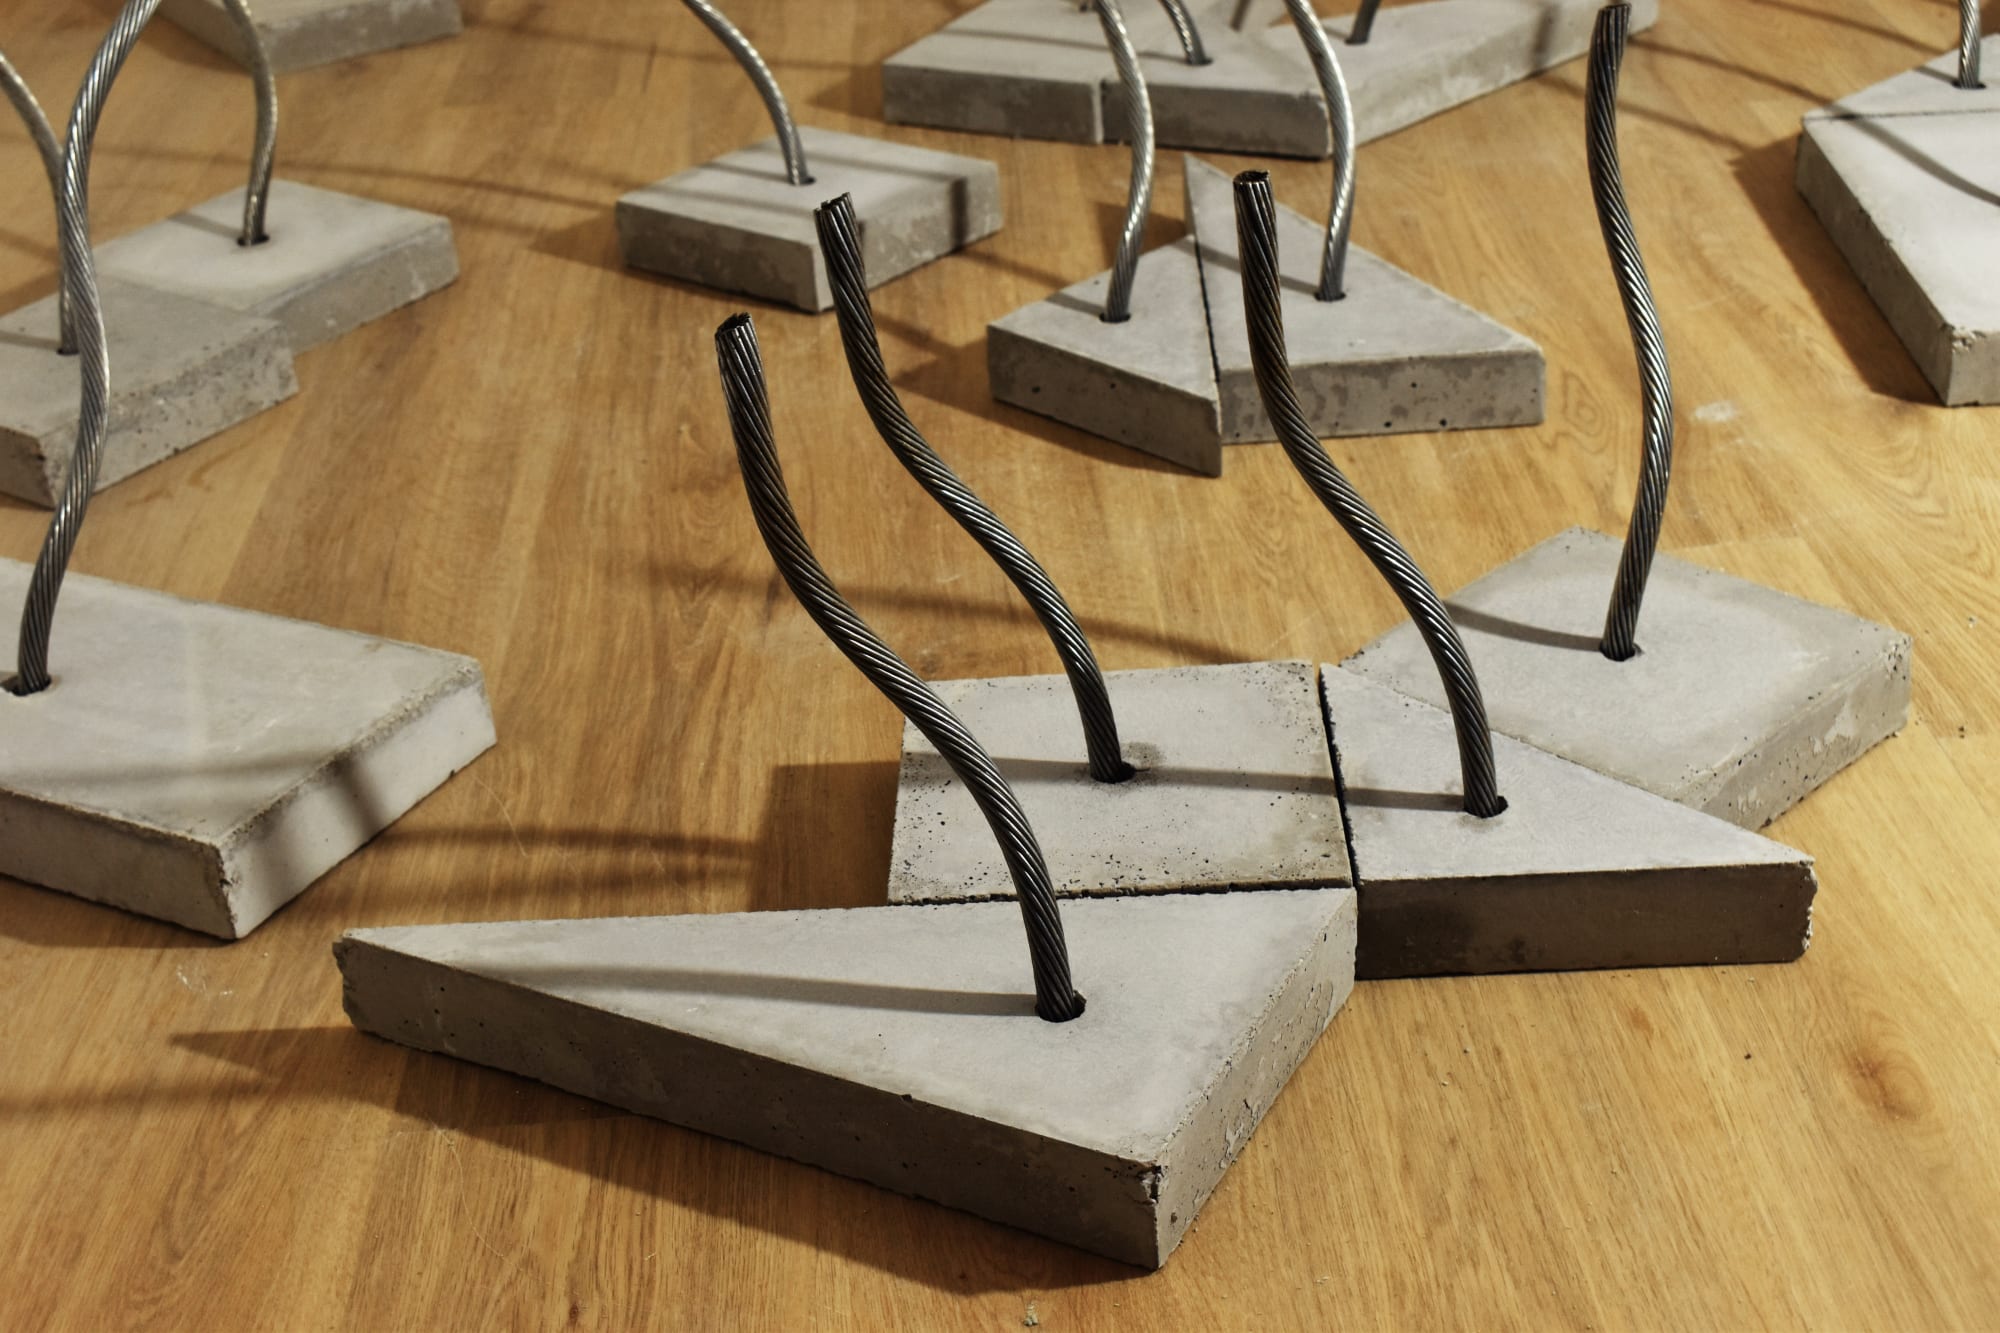 A detail shot of several sculptures made of wire rope embedded into concrete bases showing how they can be arranged 